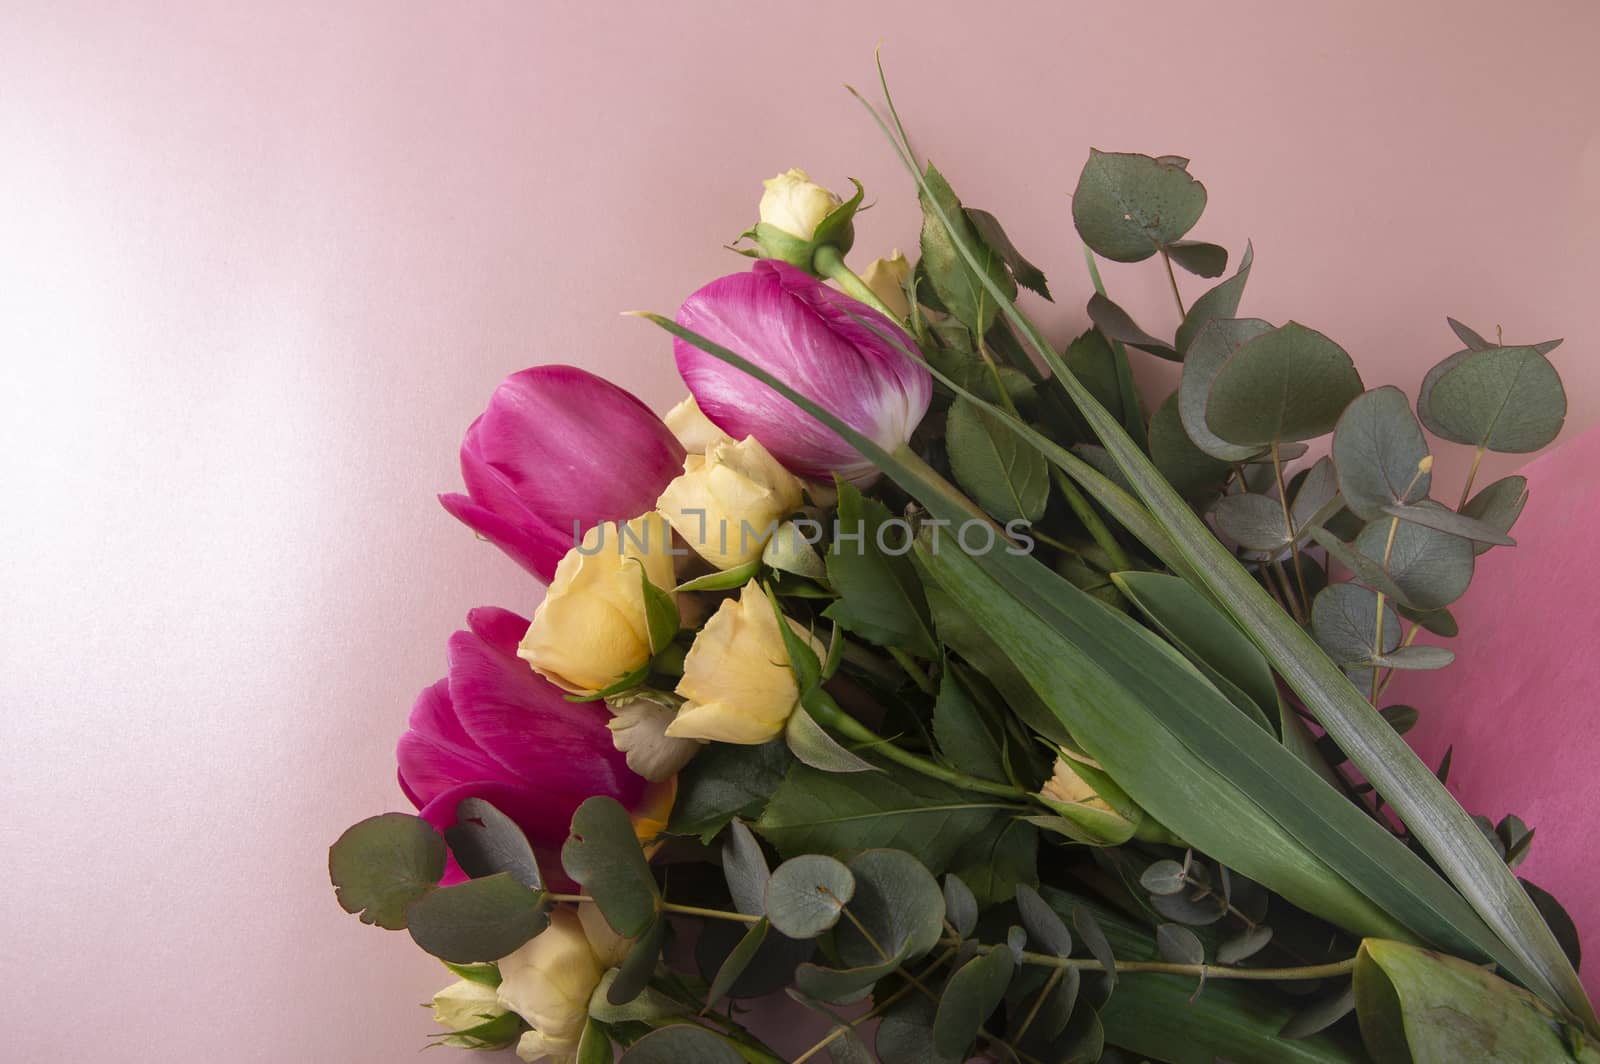 Flat lay flower arrangement with roses and tulips on a pink background top view.